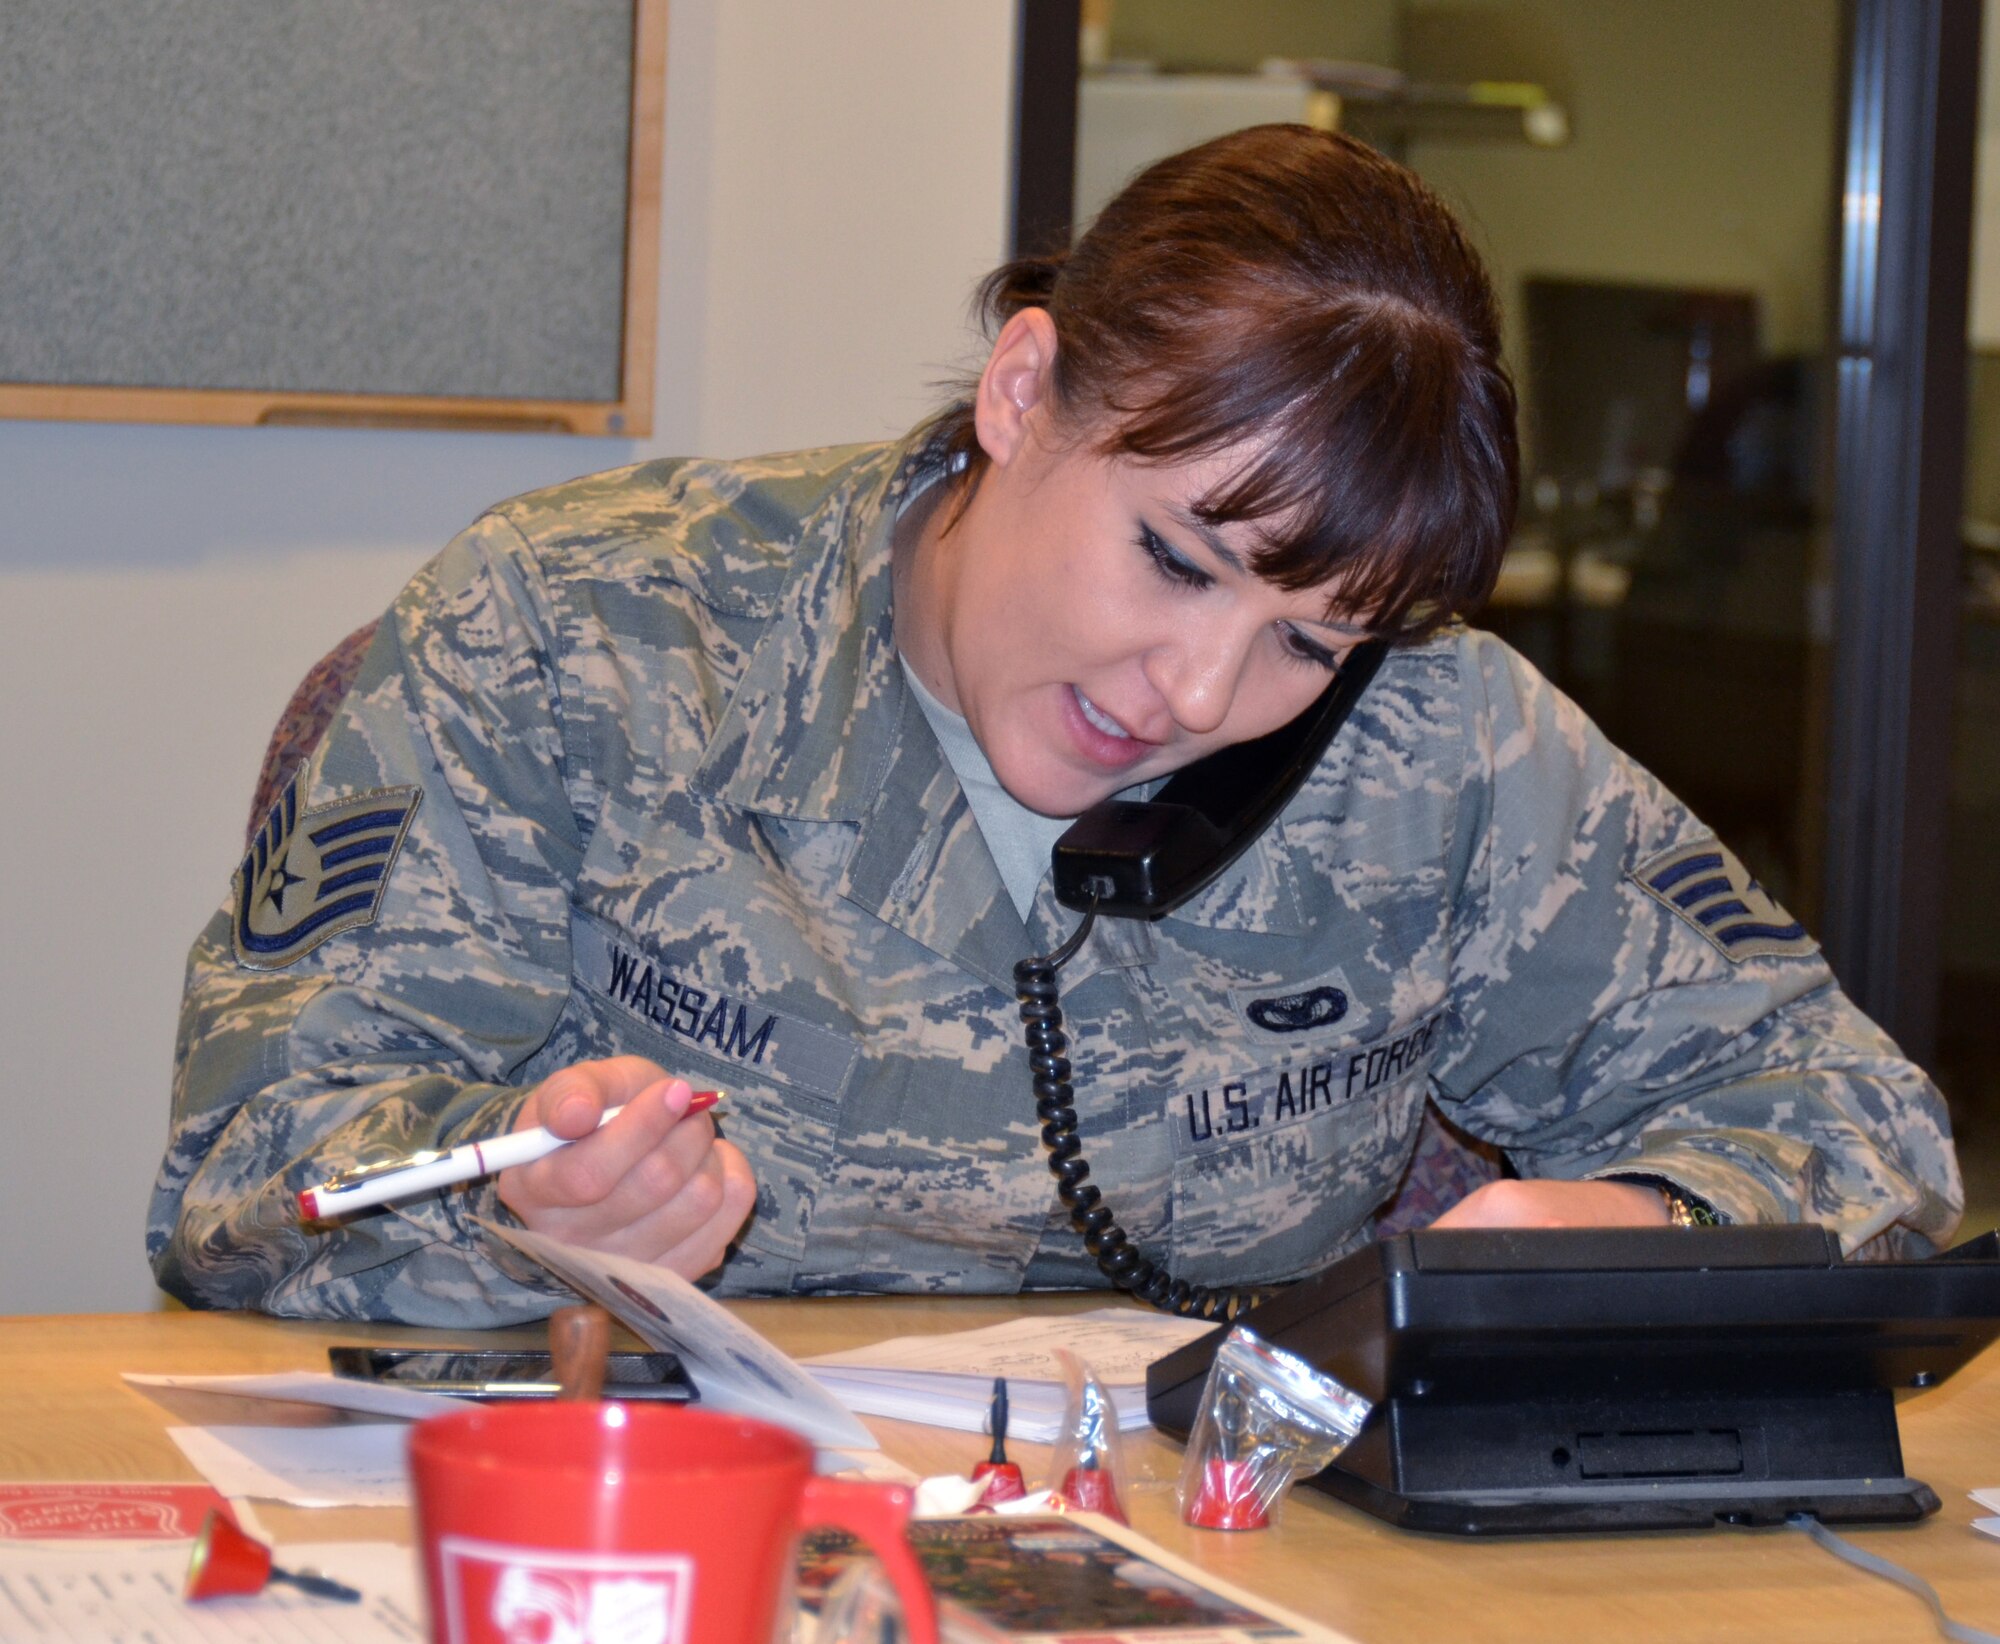 Oregon Air National Guard Staff Sgt. Sara Wassam, 142nd Fighter Wing Security Forces Squadron, takes a fund raising pledge over the phone as part of the Operation Santa Claus, during the Bob Miller Show on KAMP, AM-860 radio, here in Portland, Ore., Nov. 30, 2012. (U.S. Air Force photo by Tech. Sgt. Emily Thompson, 142nd Fighter Wing Public Affairs/Released)